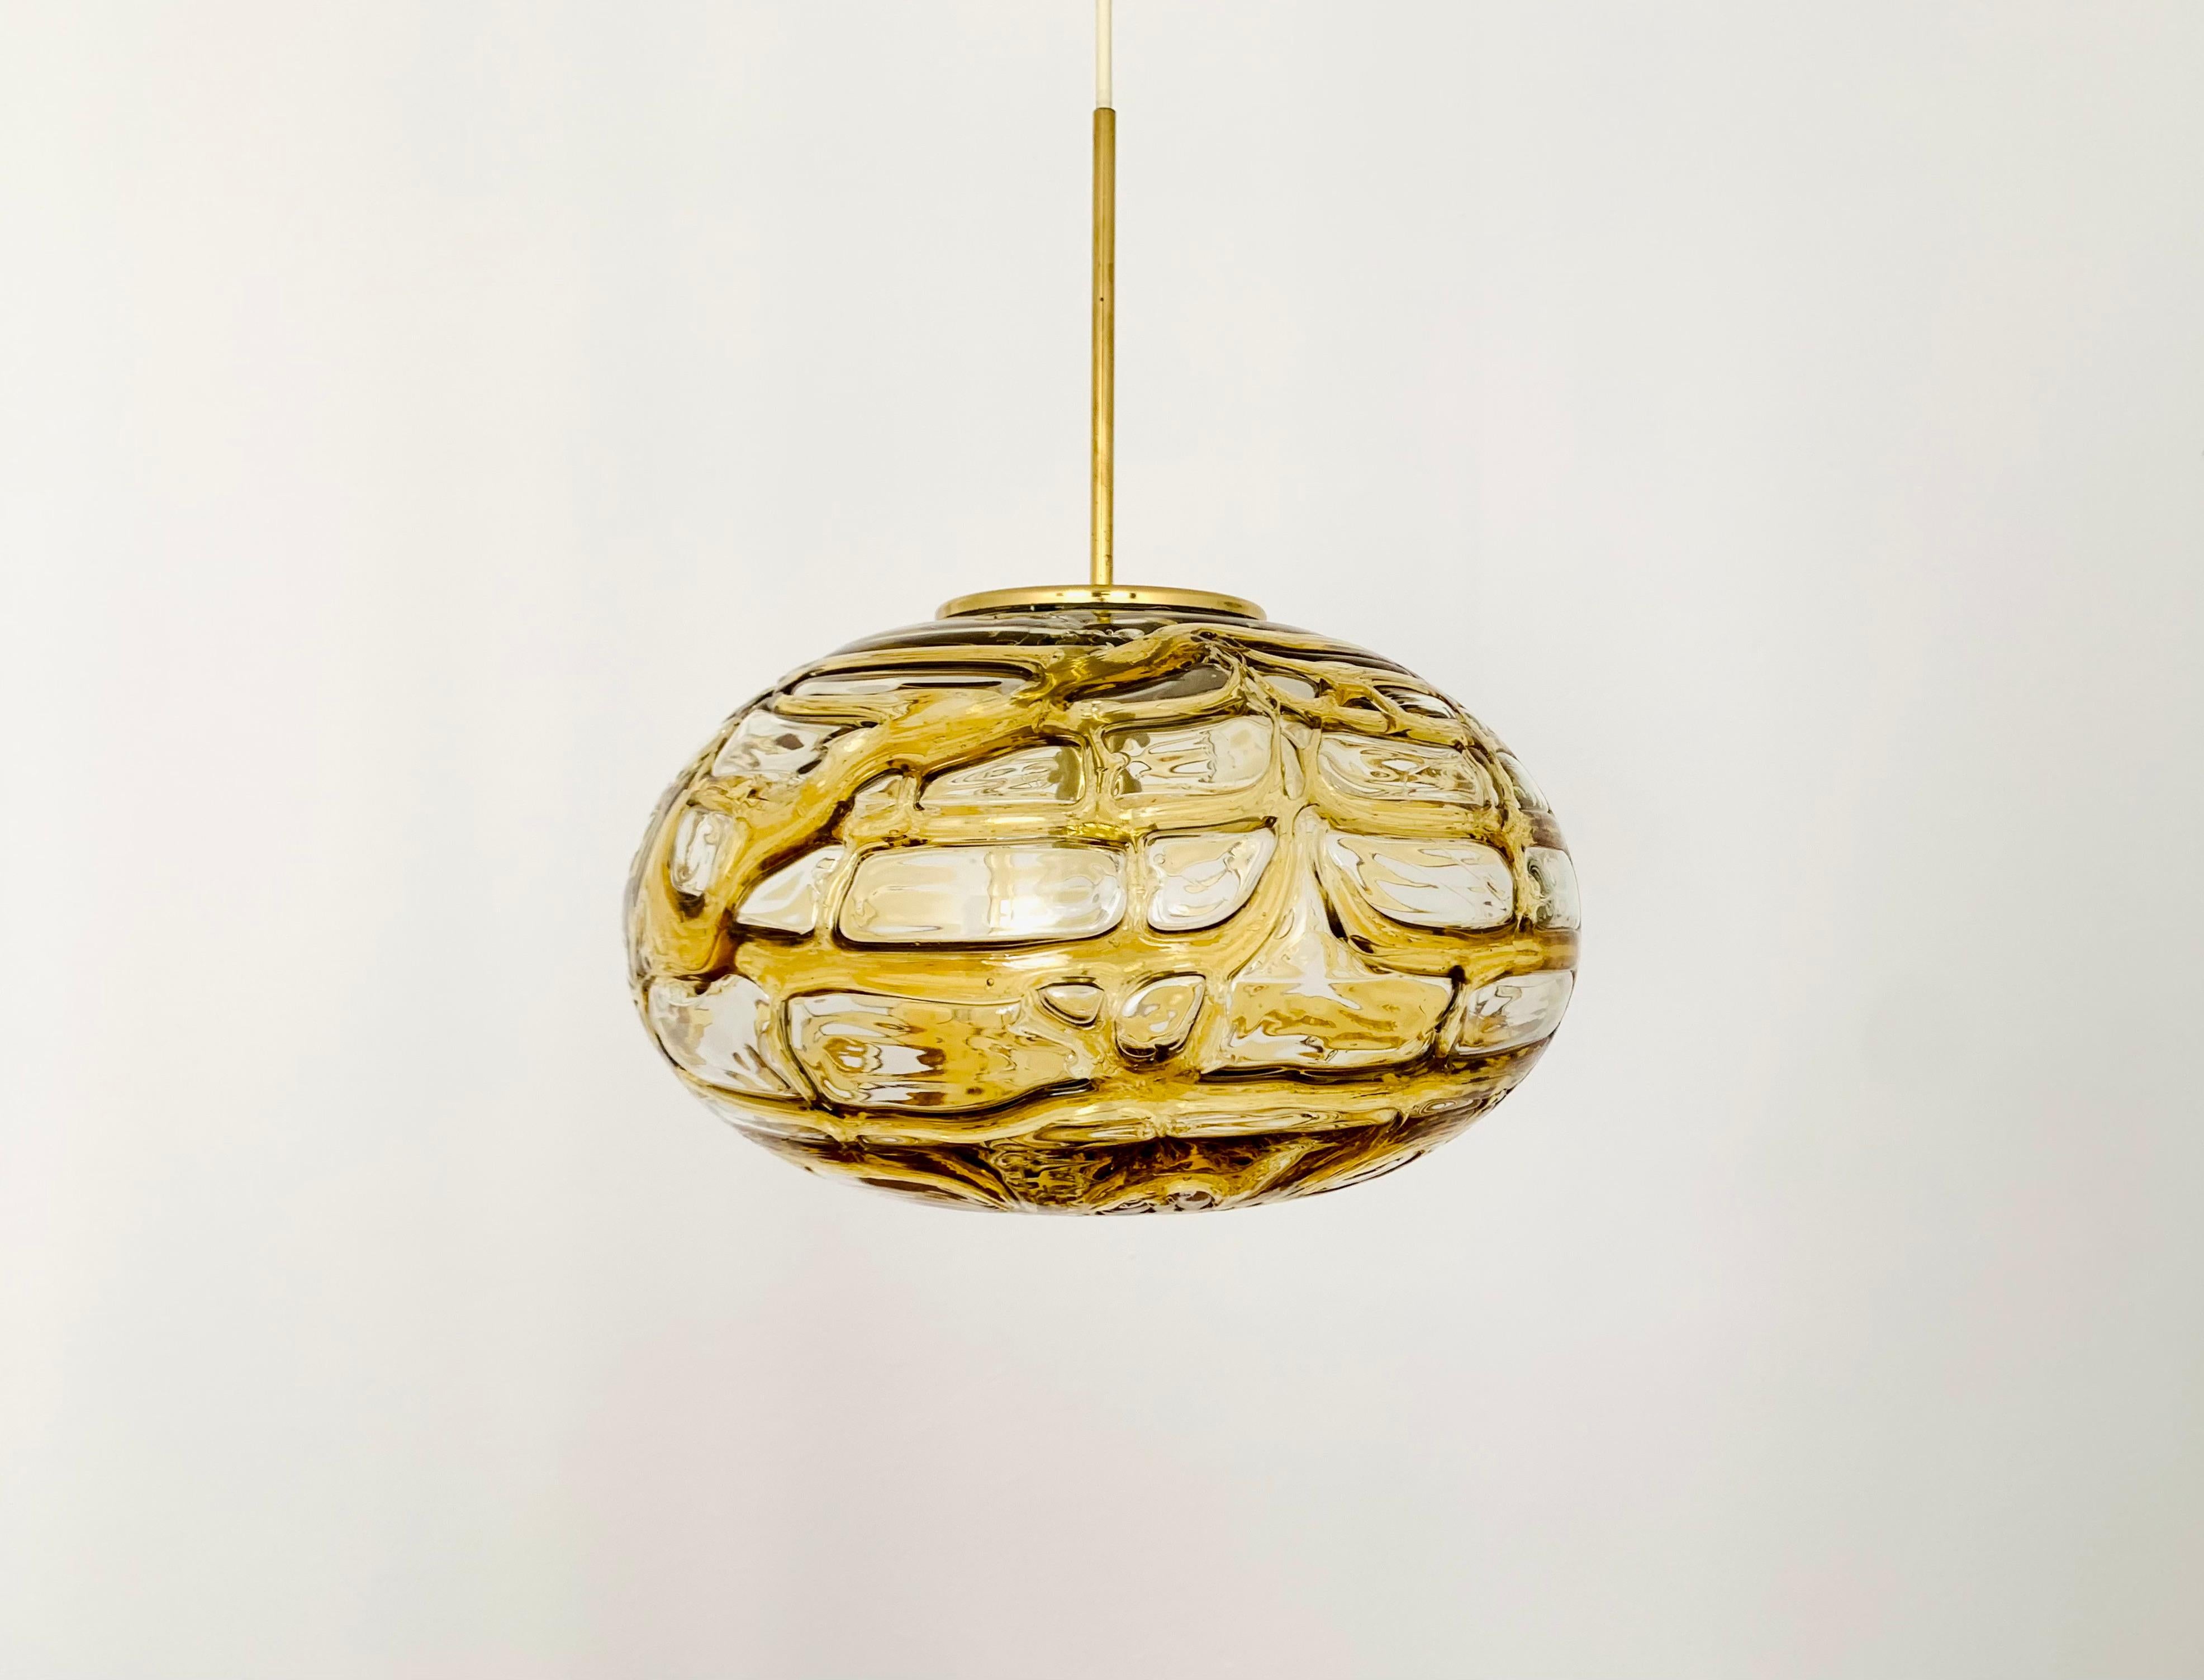 Very beautiful and large amber lamp by Doria from the 1960s.
Very elegant Hollywood Regency design with a fantastically glamorous look.
The structure in the glass creates a spectacular light.

Manufacturer: Doria

Condition:

Very good